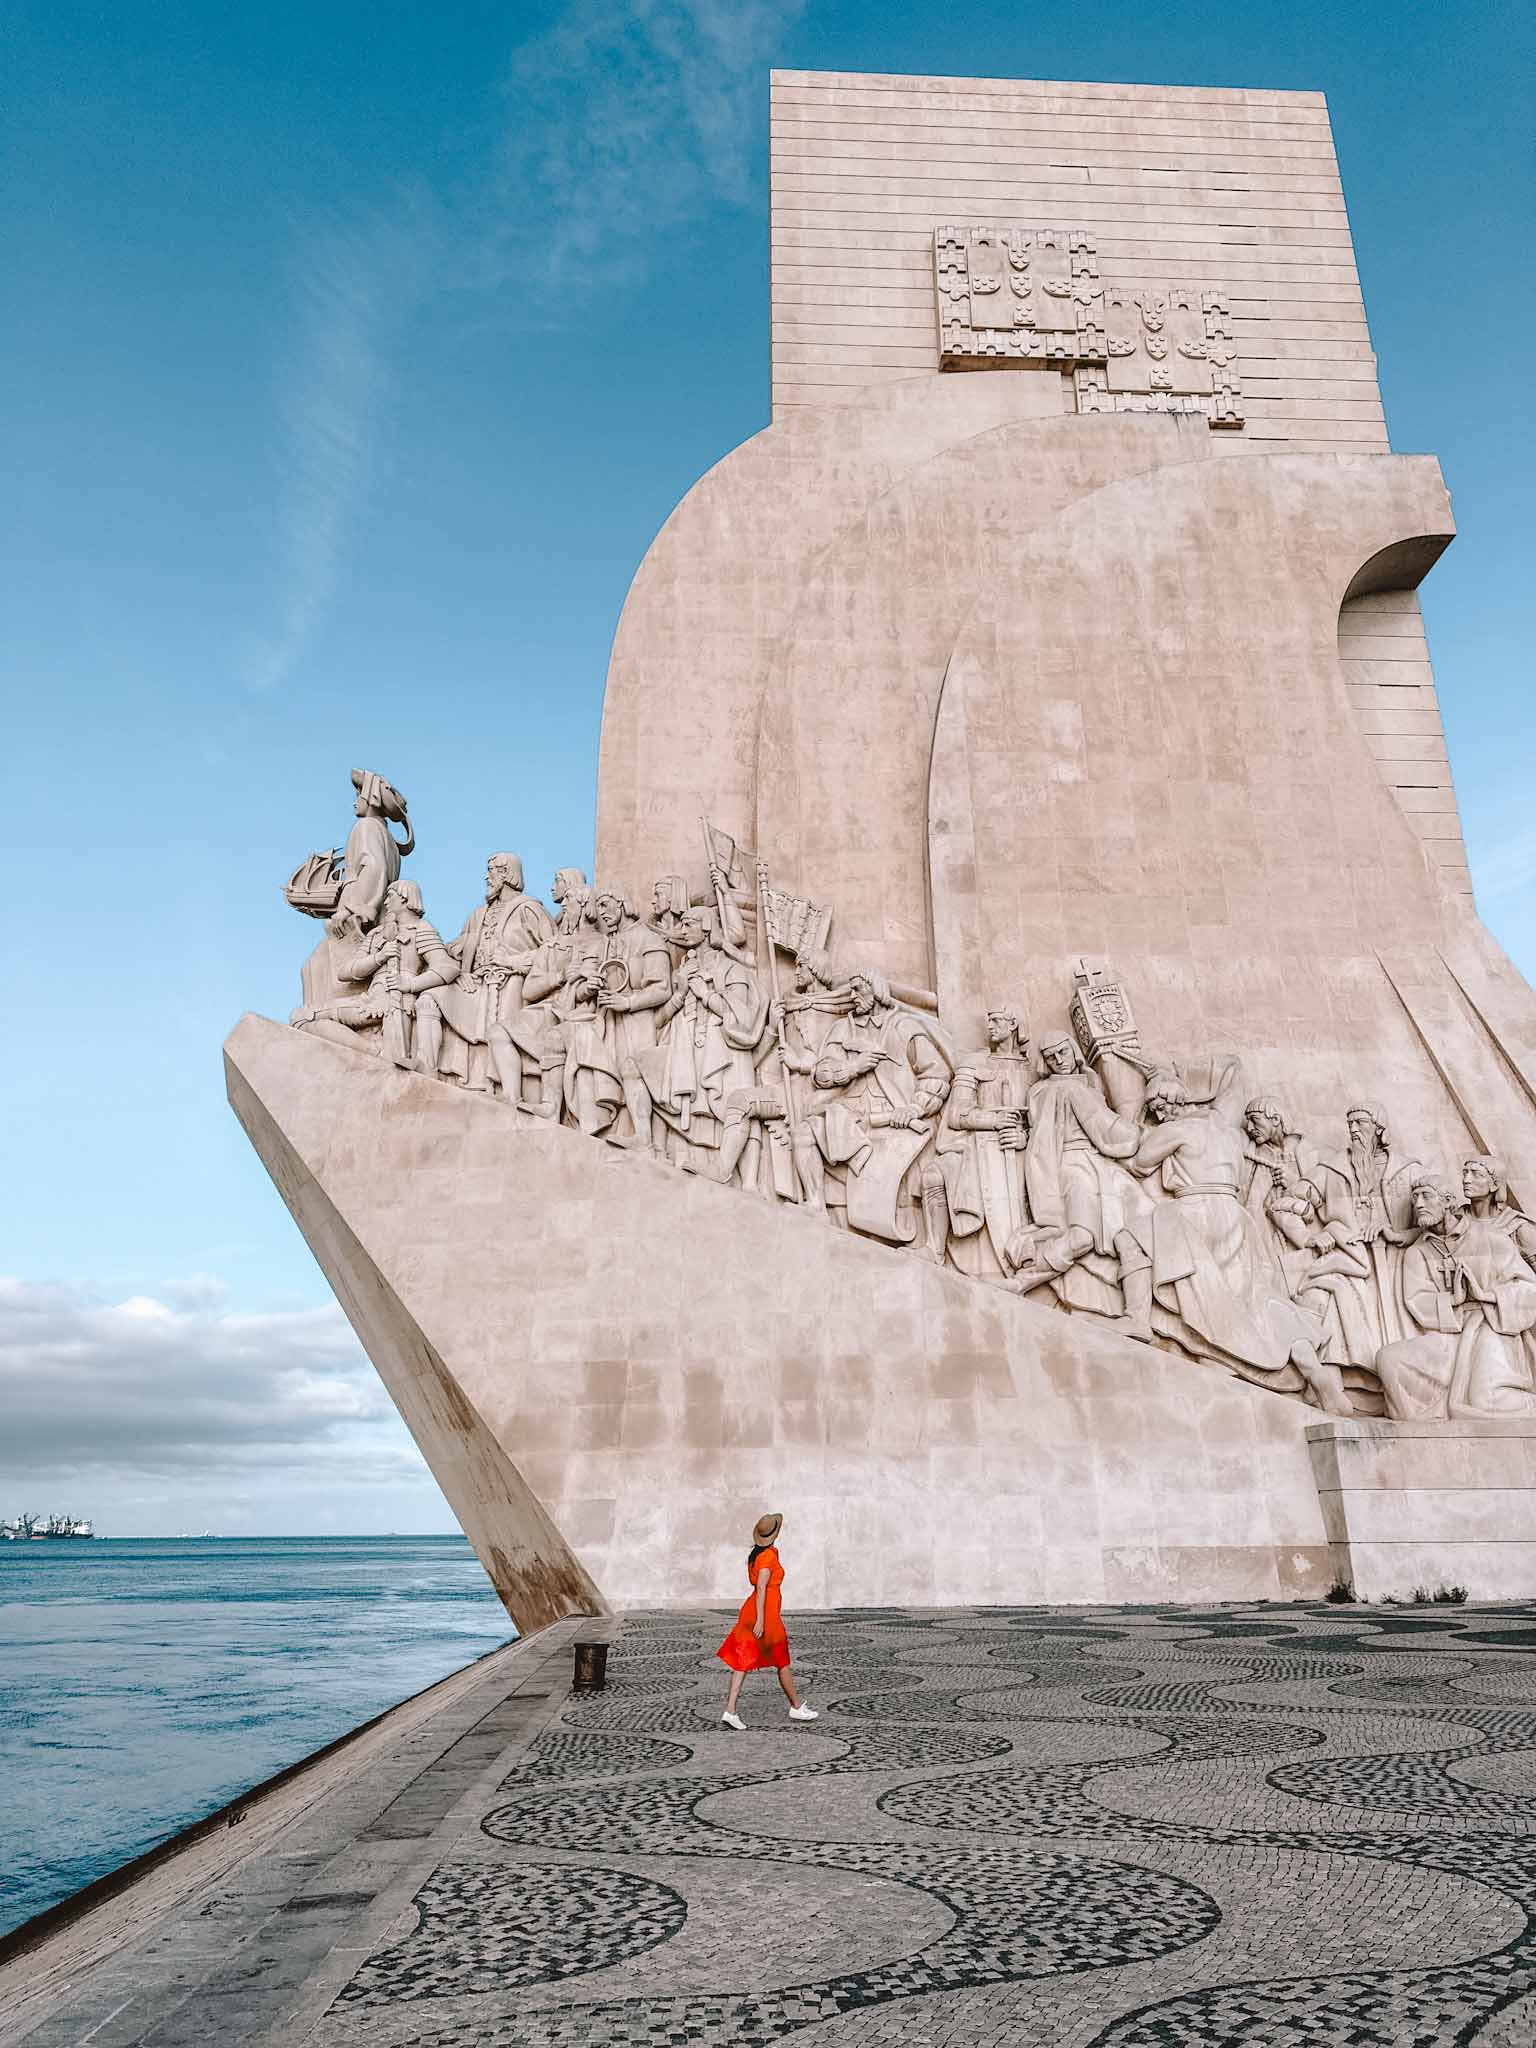 Best Instagram photo spots in Lisbon, Portugal - Monument of the Discoveries and Compass Rose